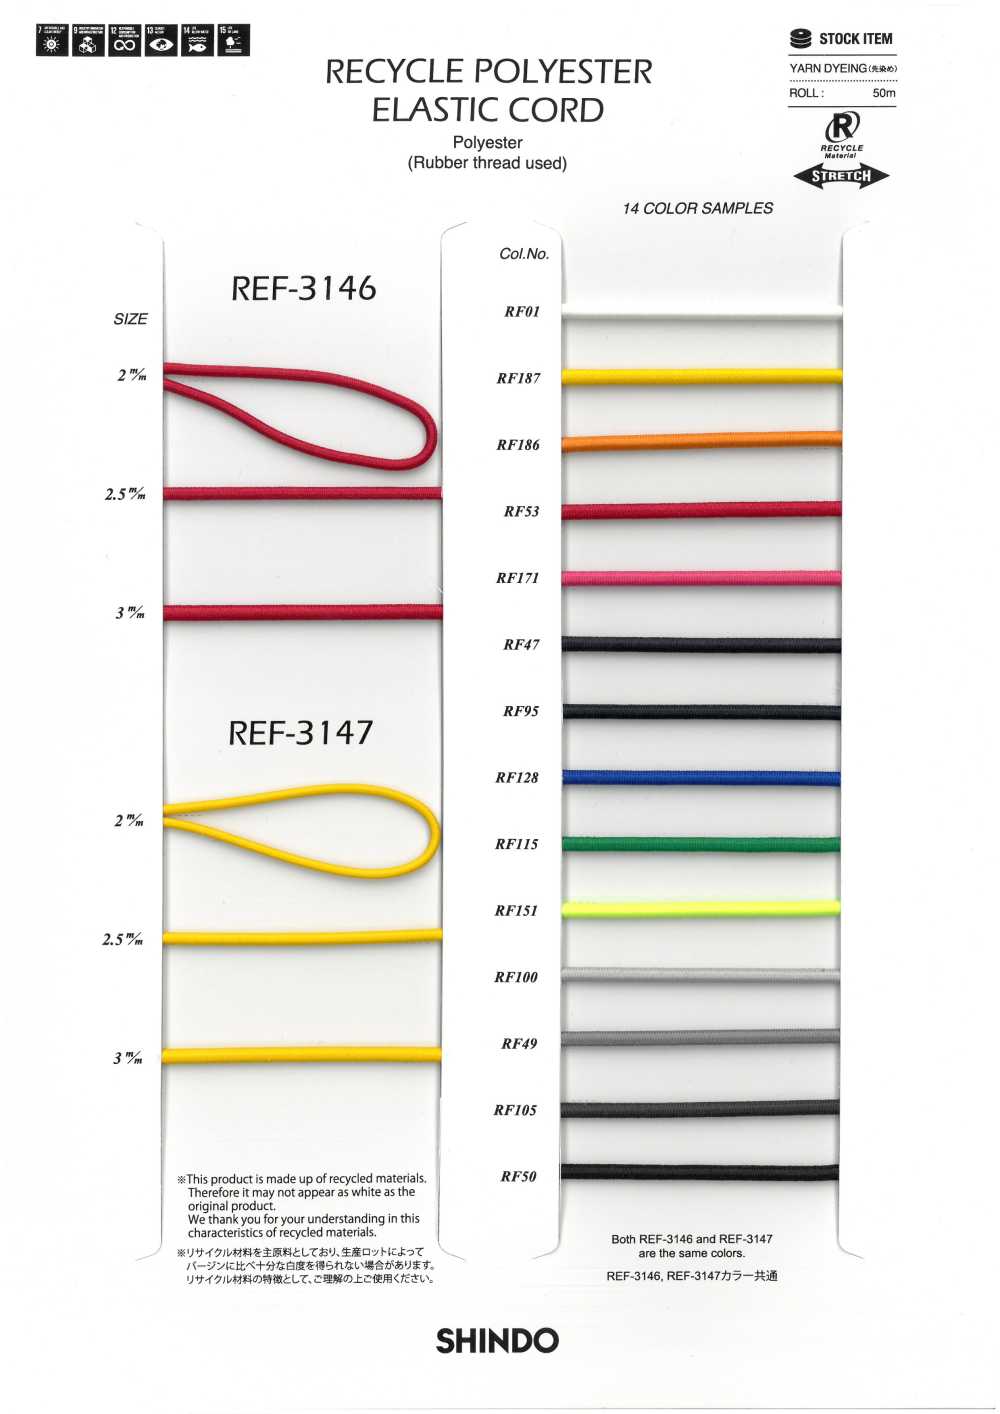 REF-3146 Recycled Polyester Elastic Cord (Soft Type)[Ribbon Tape Cord] SHINDO(SIC)